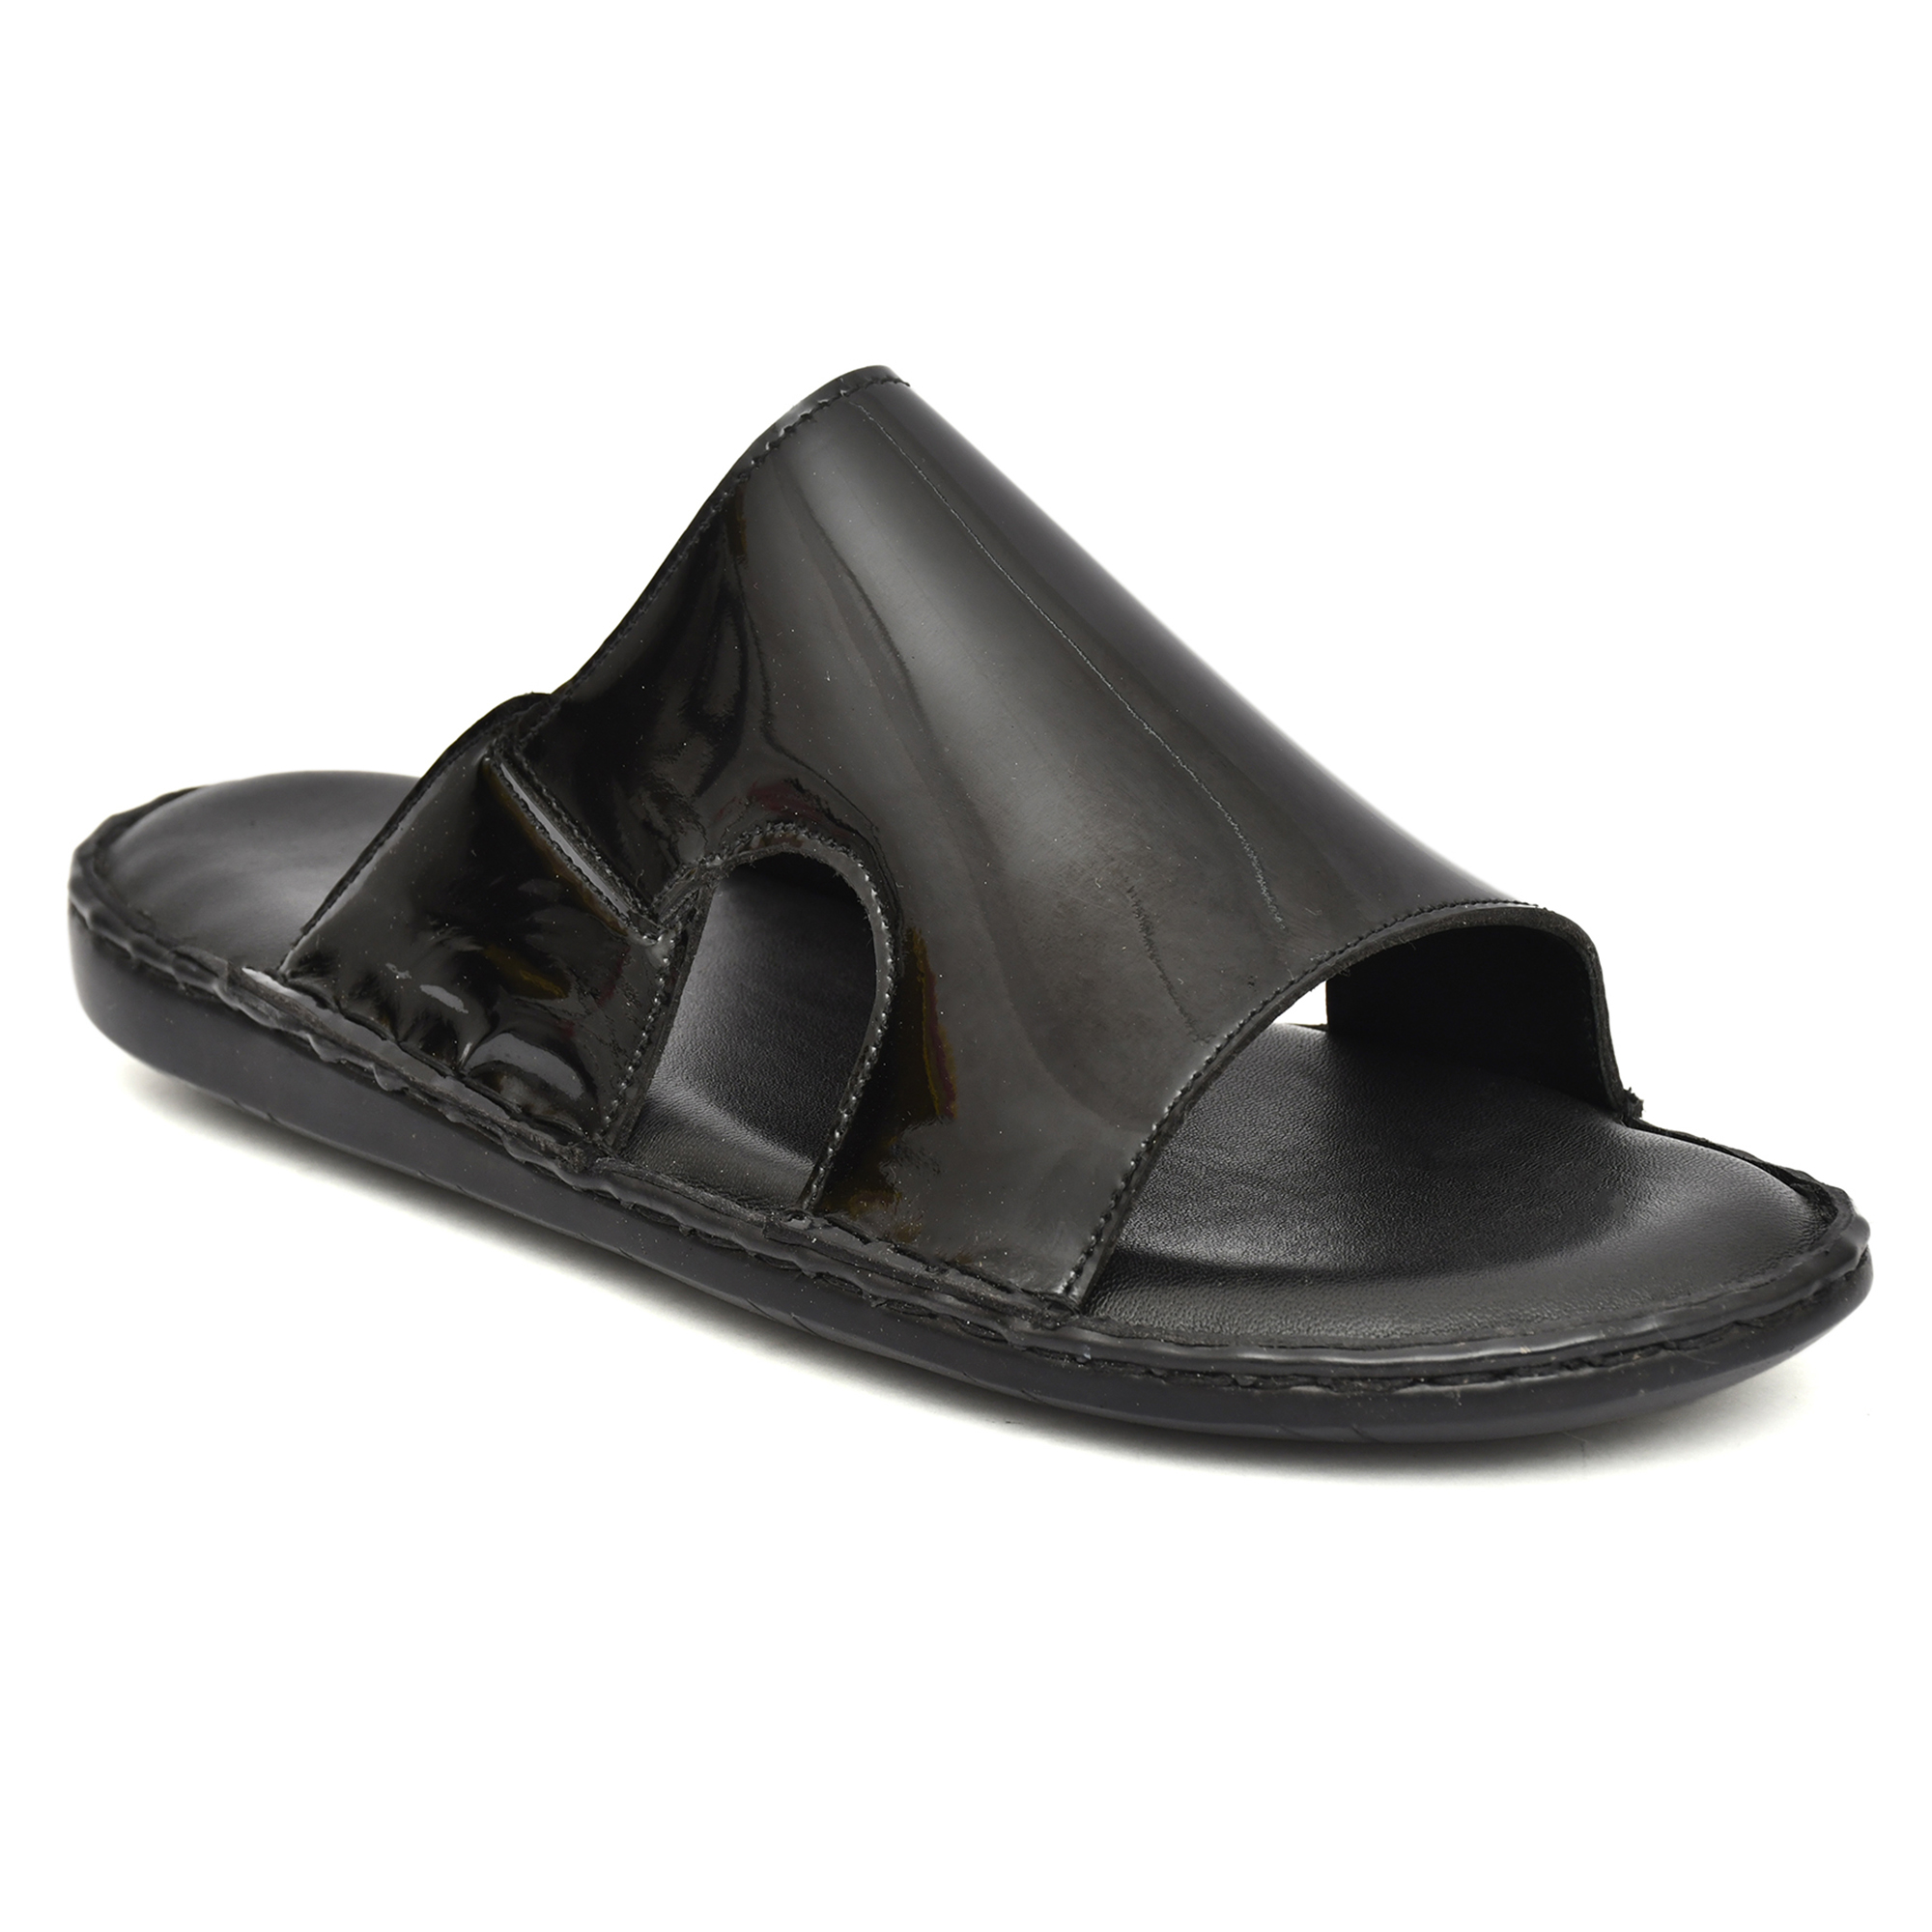 Black Patent Leather Slippers for Men with Memory foam footpad by asm.